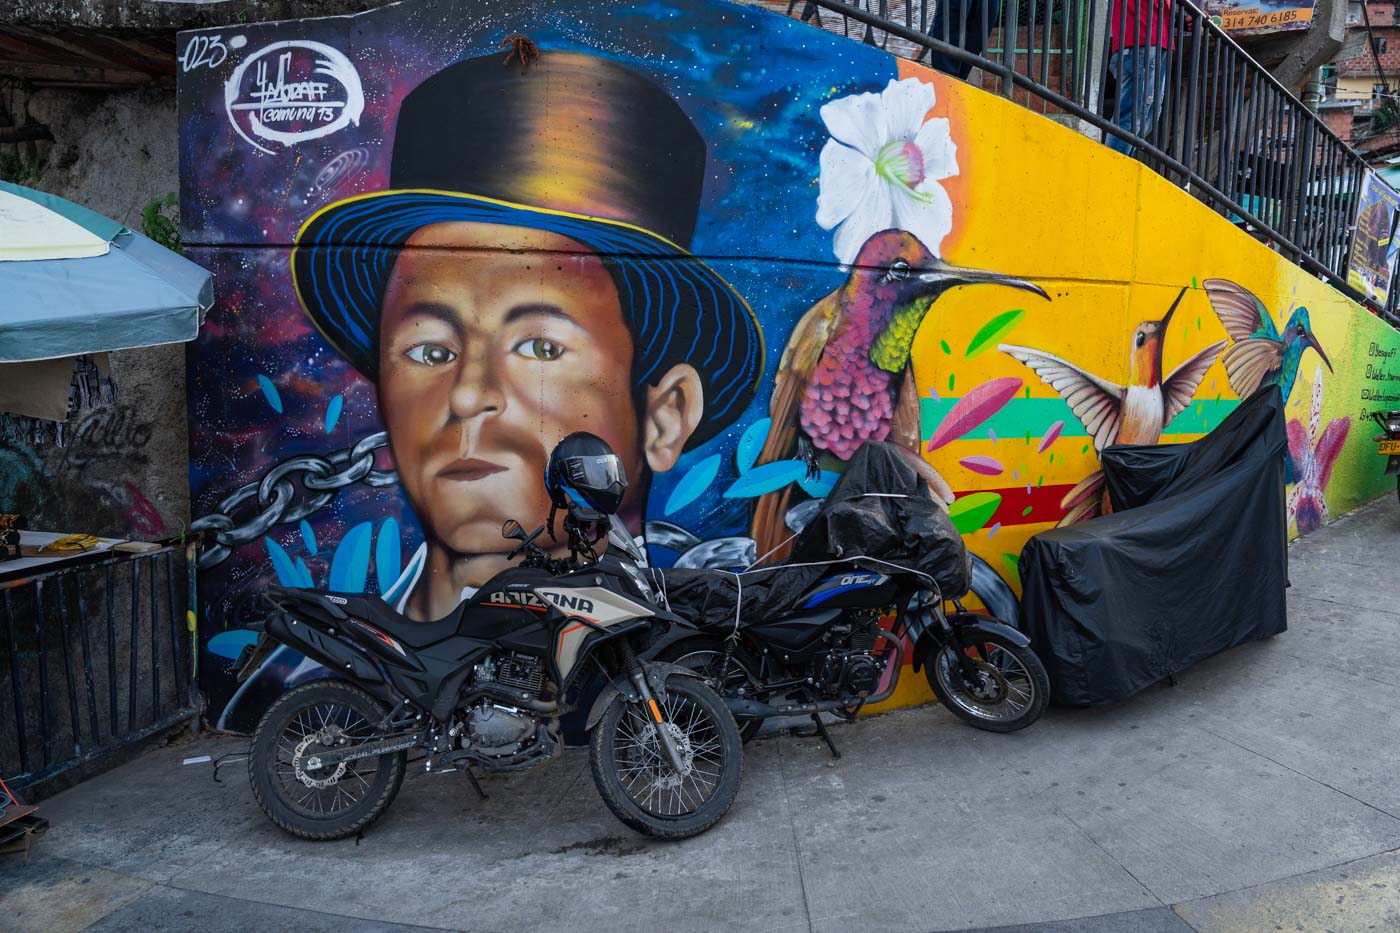 Three bikes parked besides street art depicting a man in a top hat and hummingbirds.